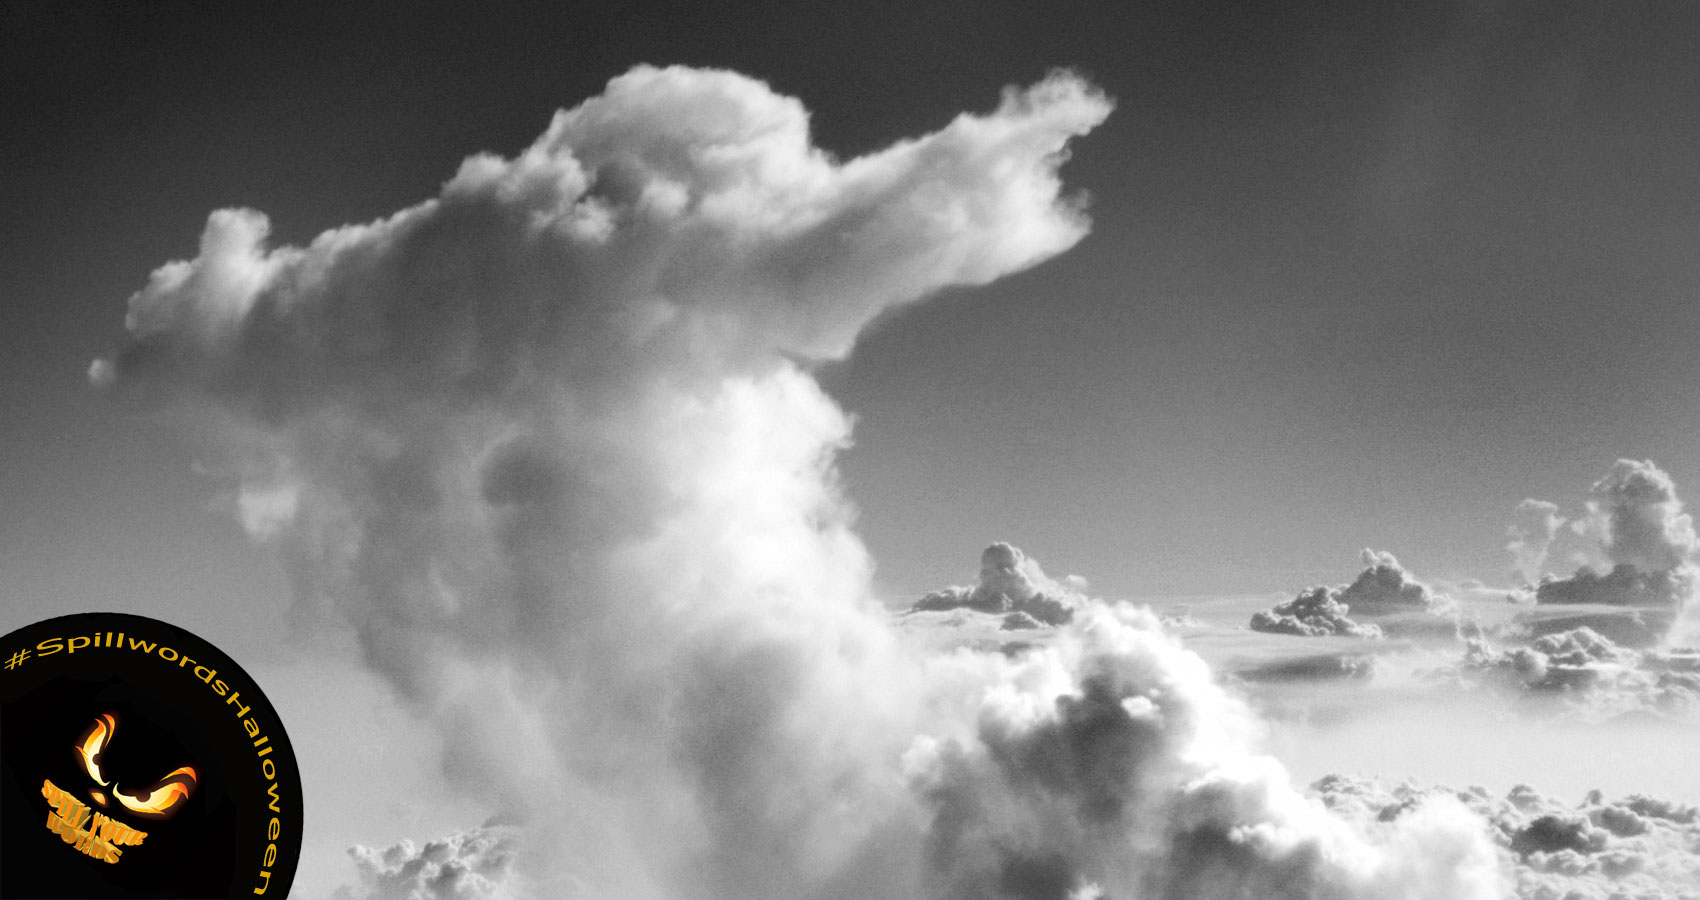 In The Clouds, poetry written by Lynn White at Spillwords.com